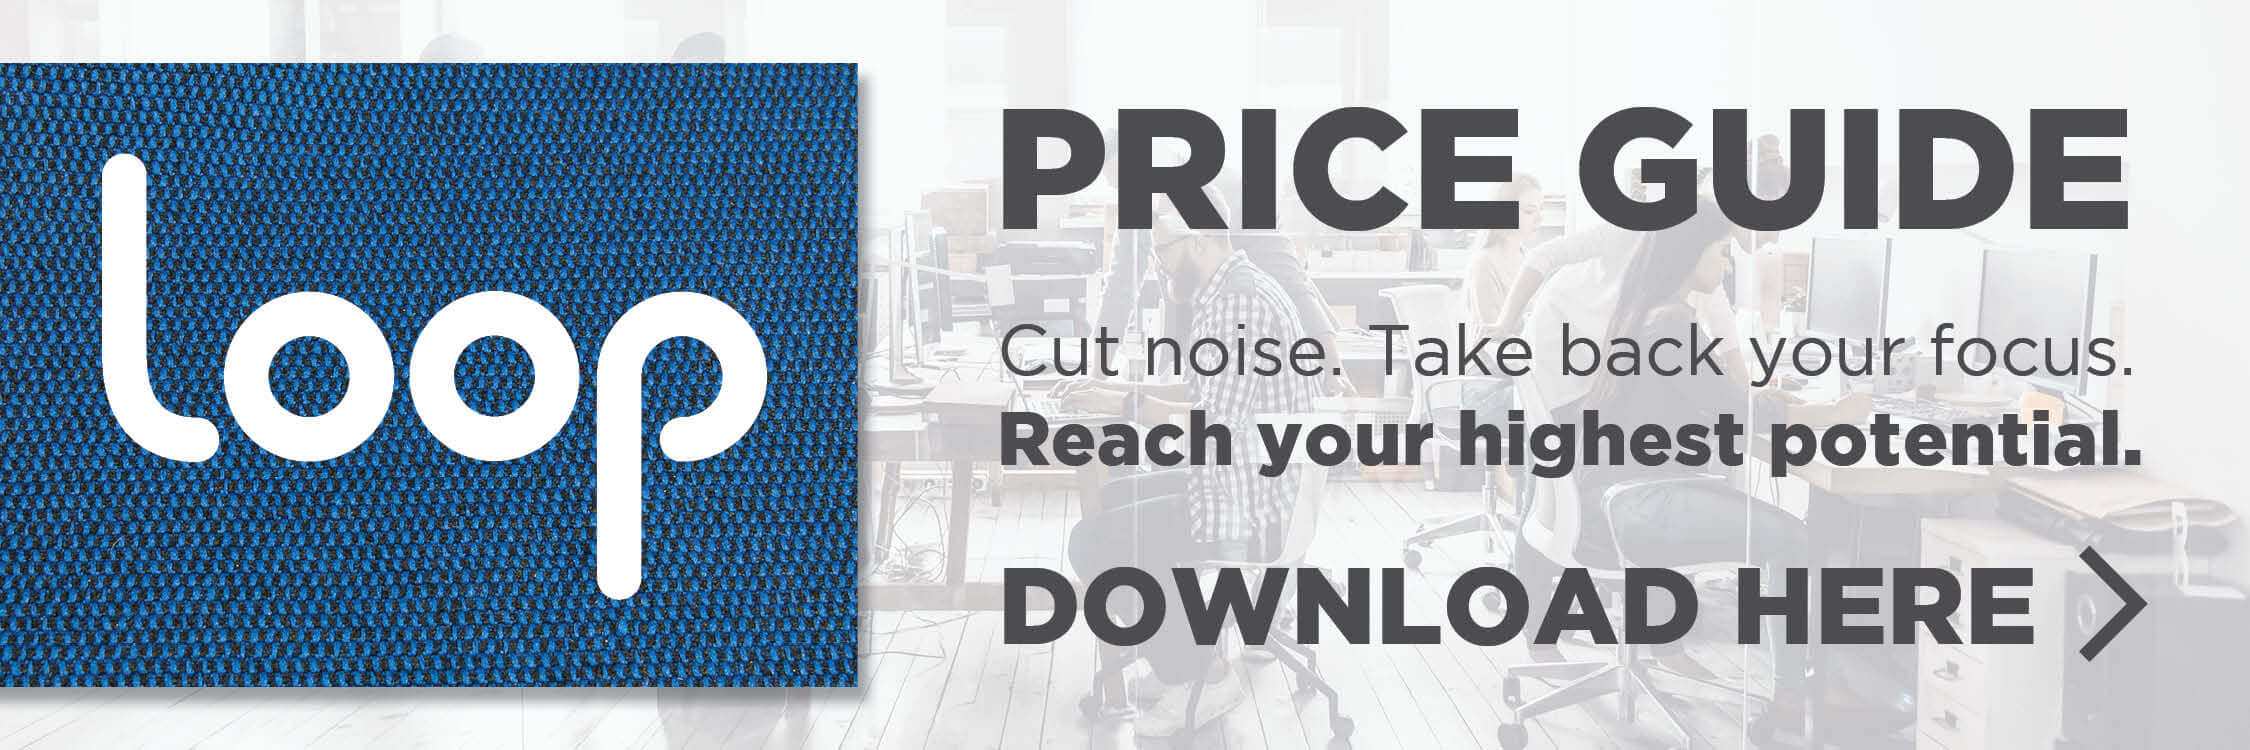 Blue Loop banner inviting viewers to download price guide.